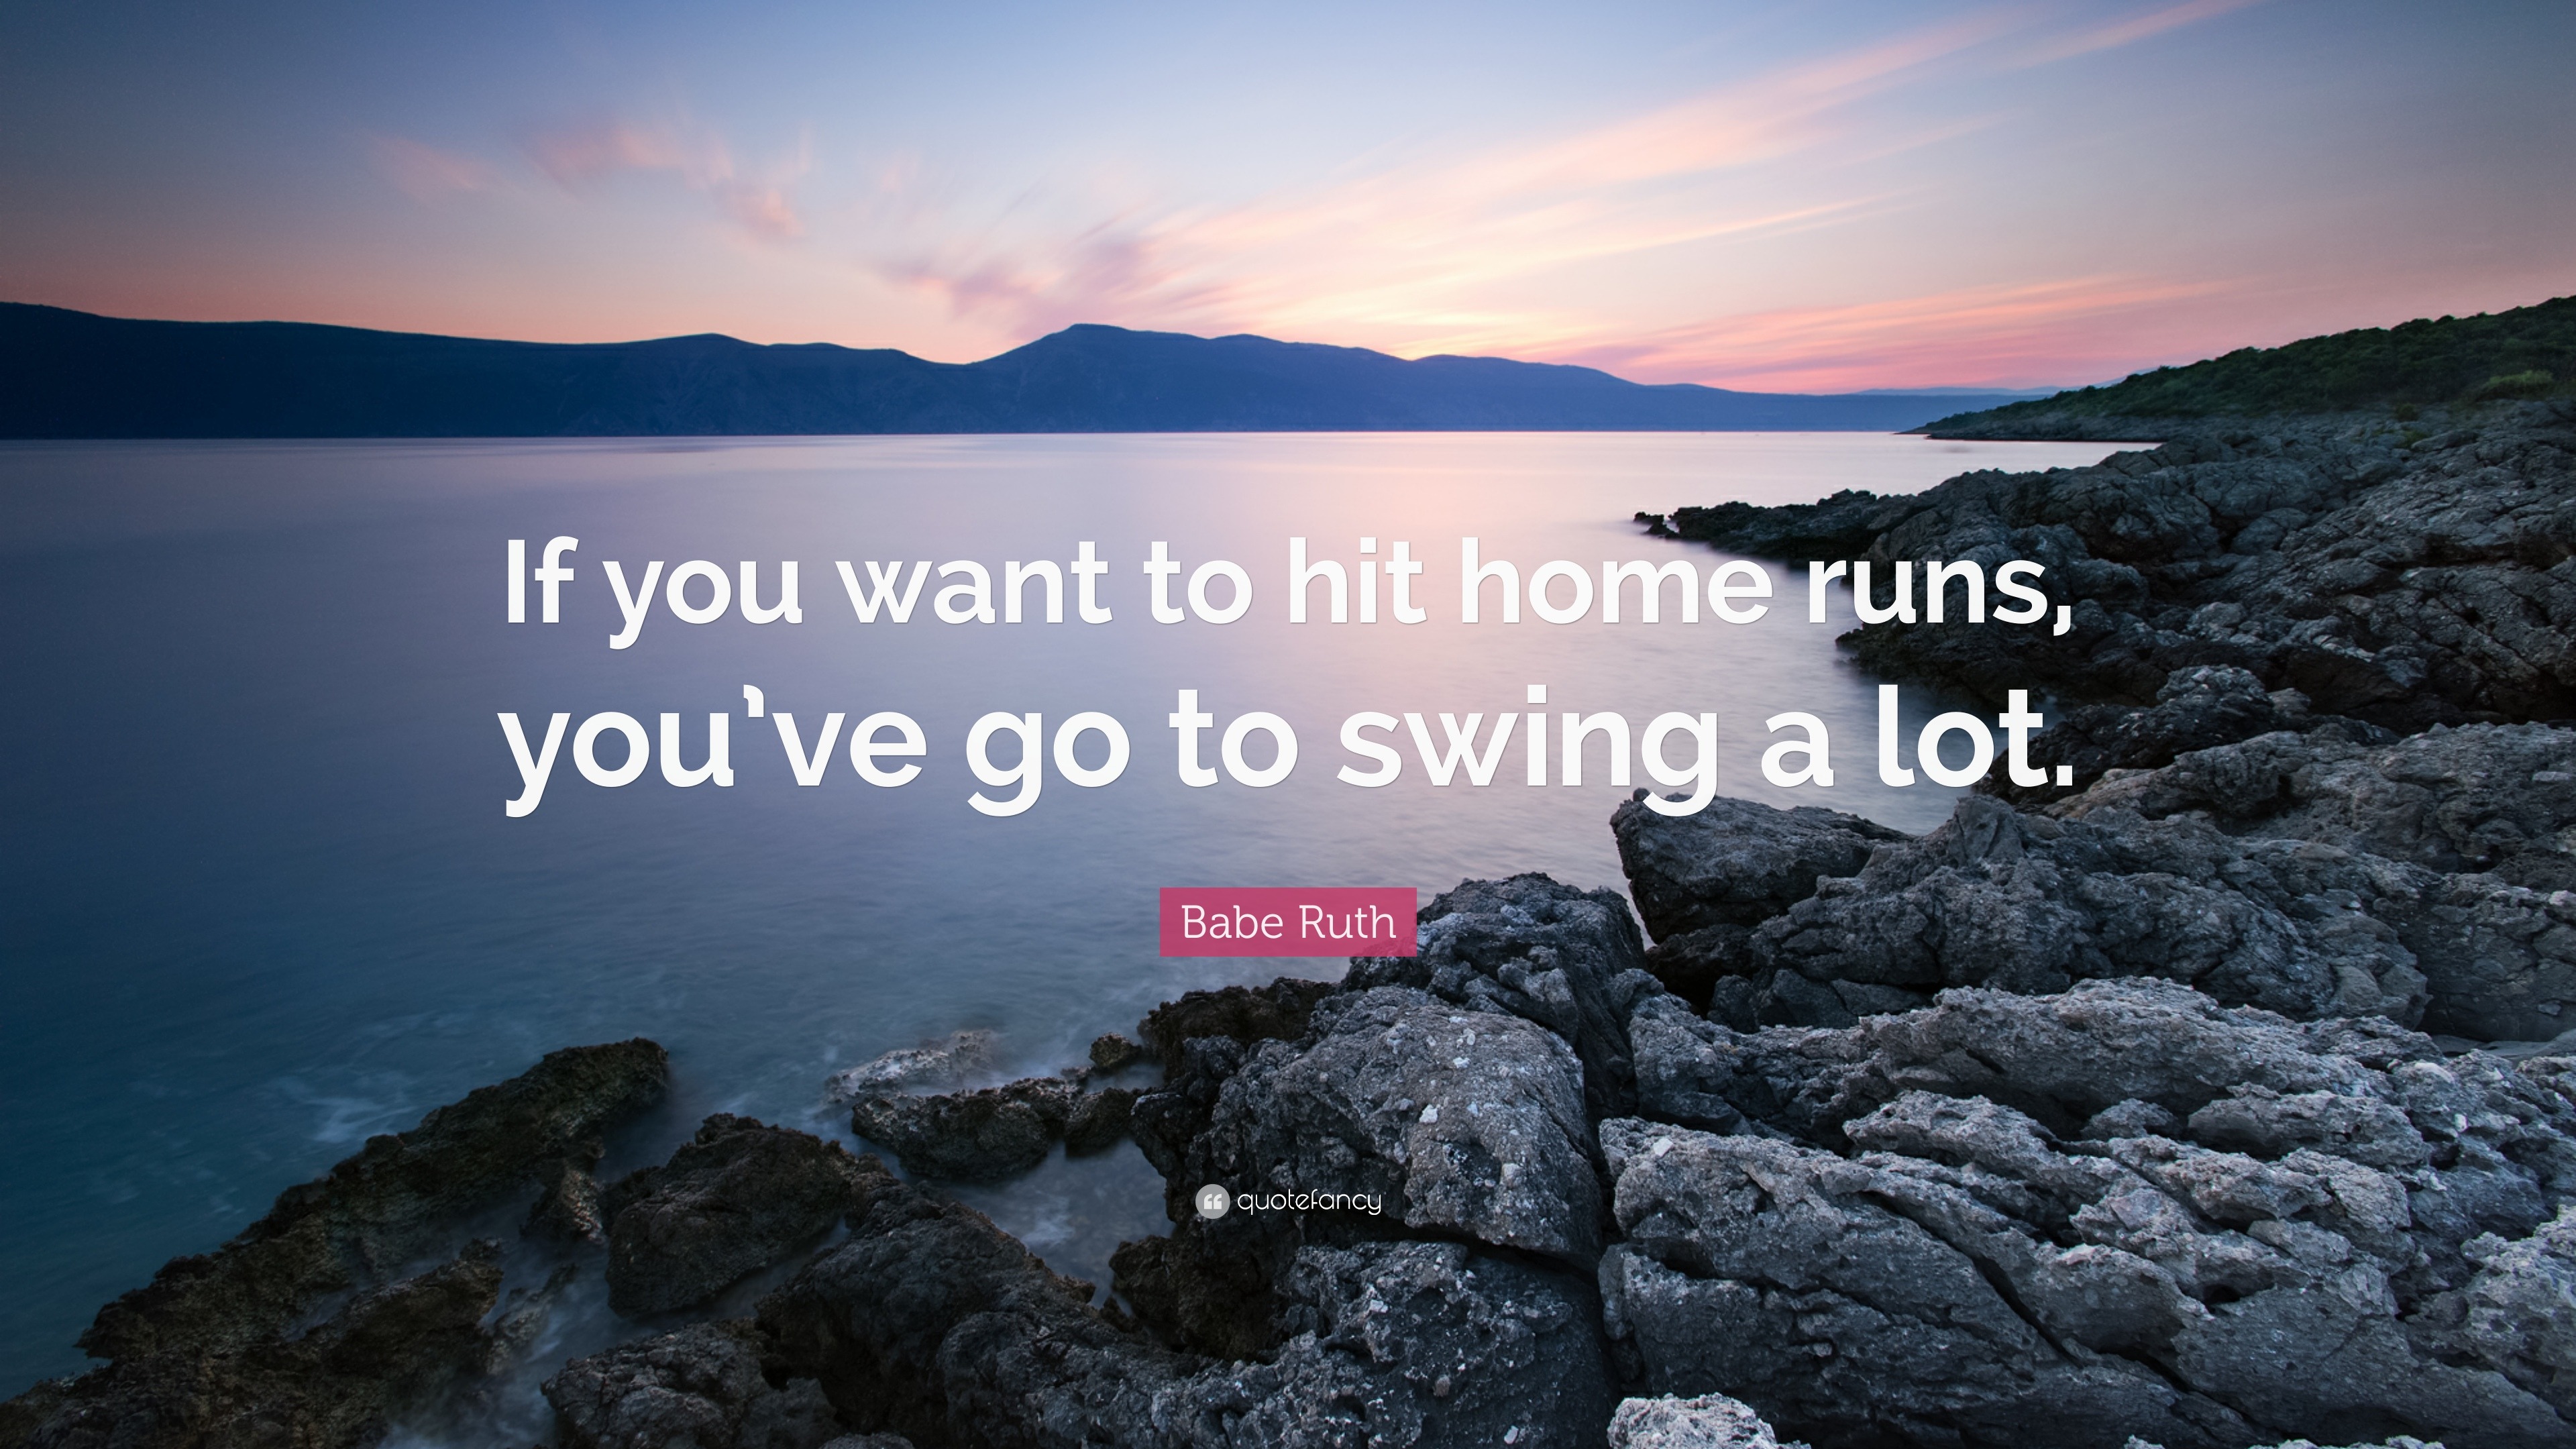 Babe Ruth quotes